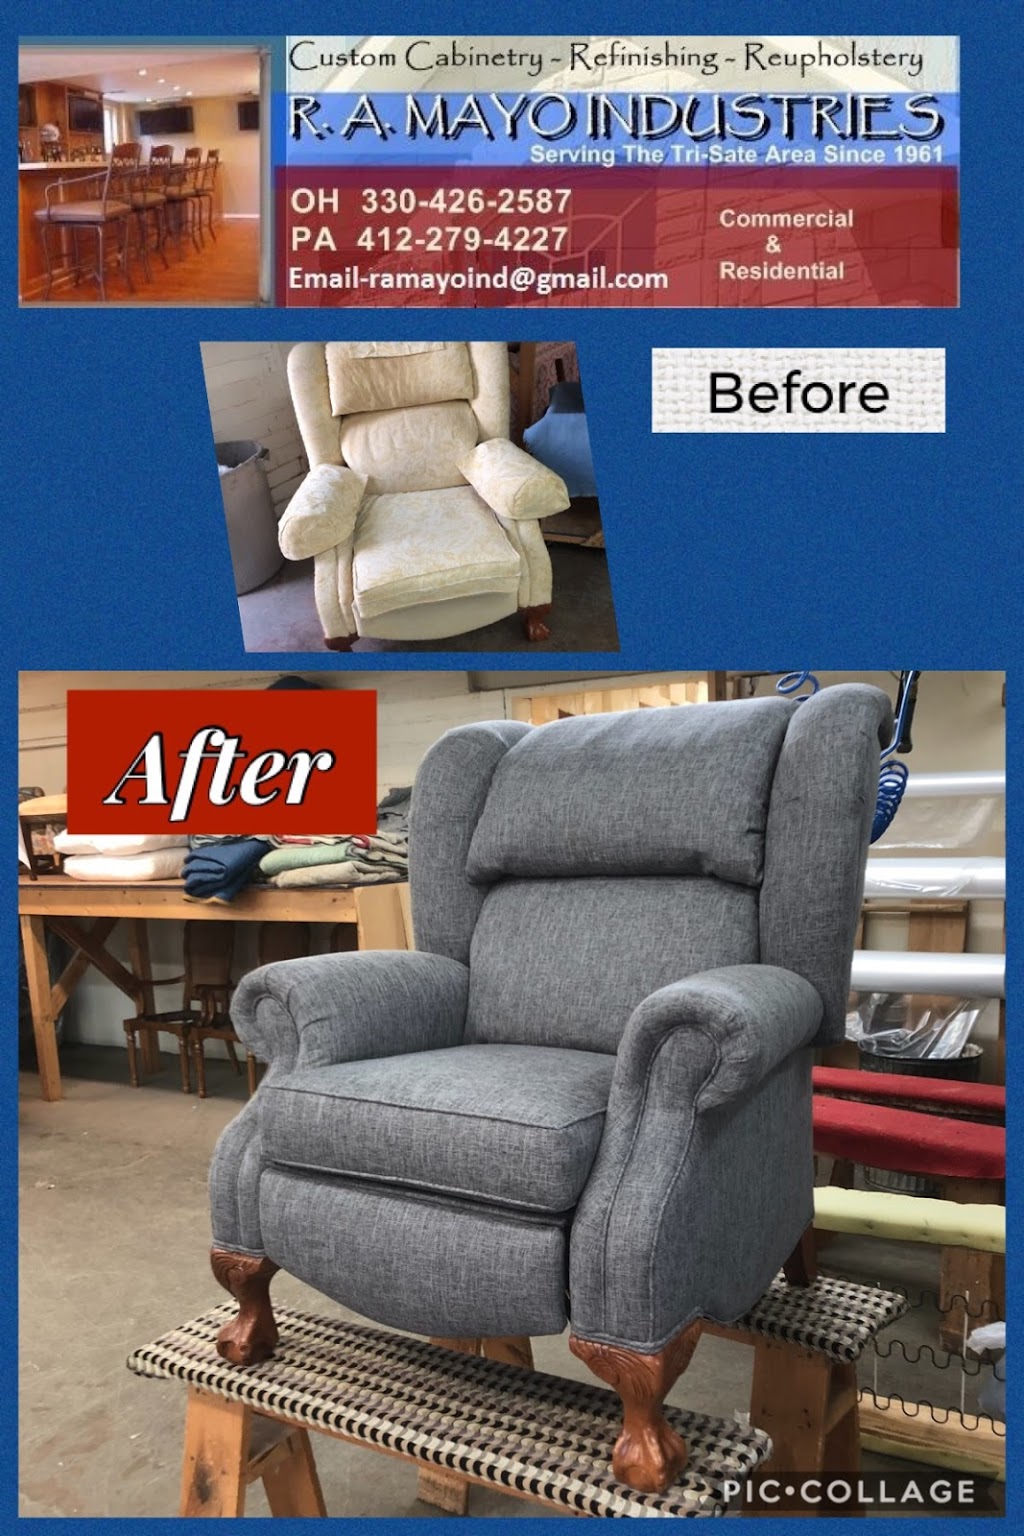 R A Mayo Industries Upholstery & Custom Cabinetry | 821 W Main St, Carnegie, PA 15106 | Phone: (412) 279-4227